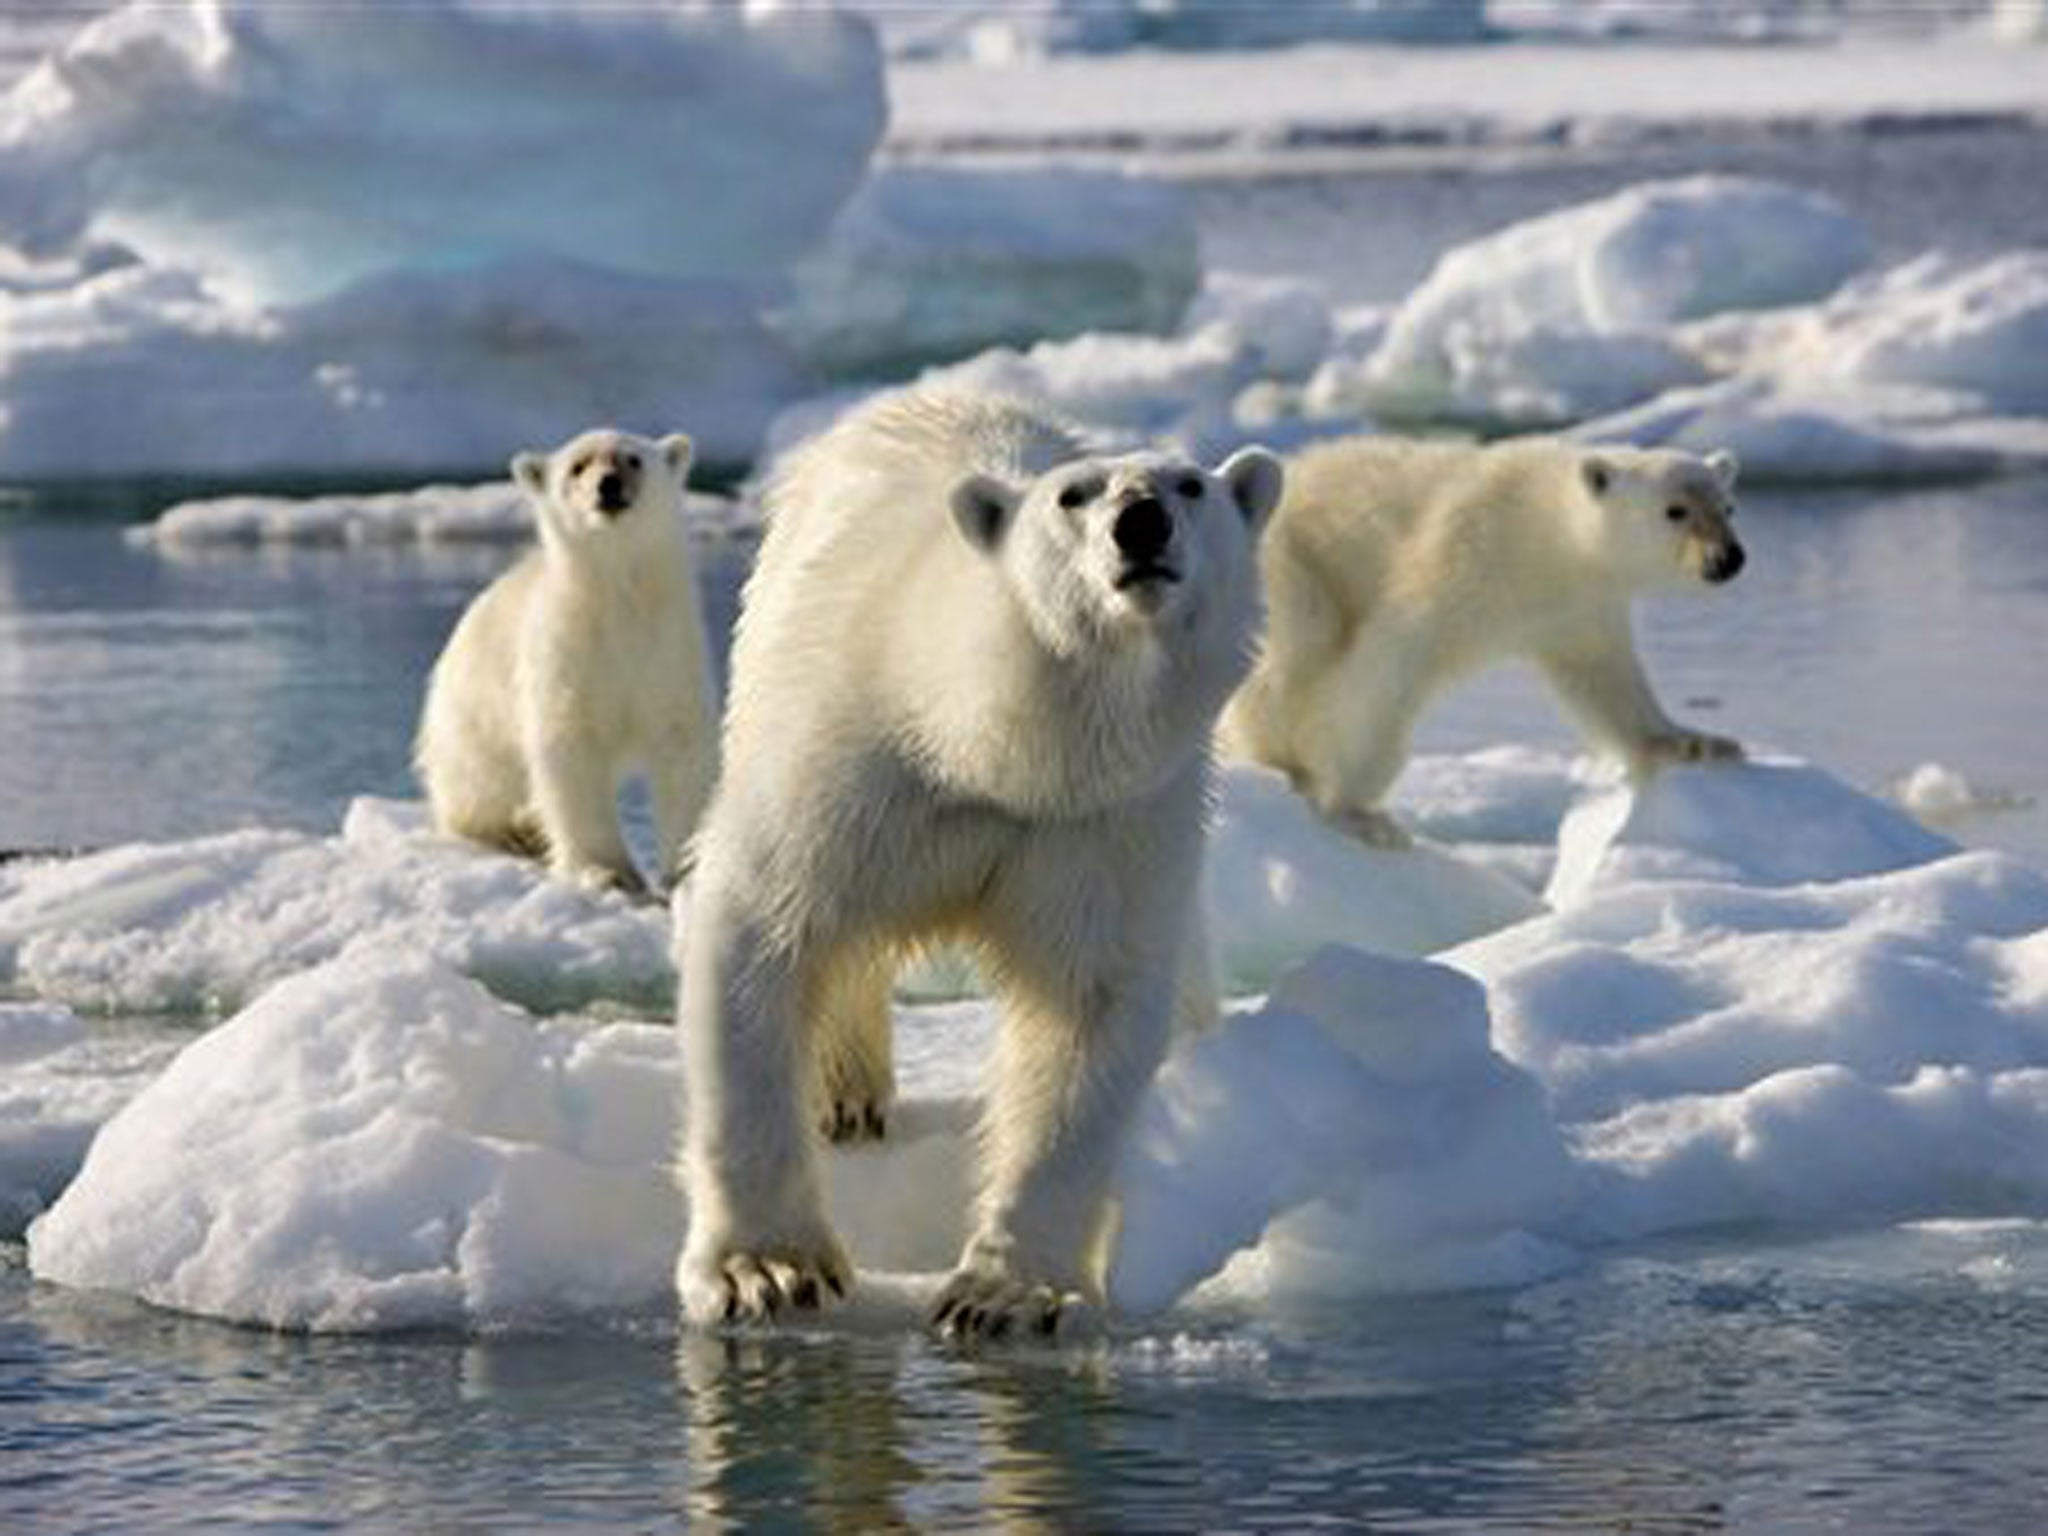 Frozen Planet and other nature shows have reportedly proved unpopular in the US